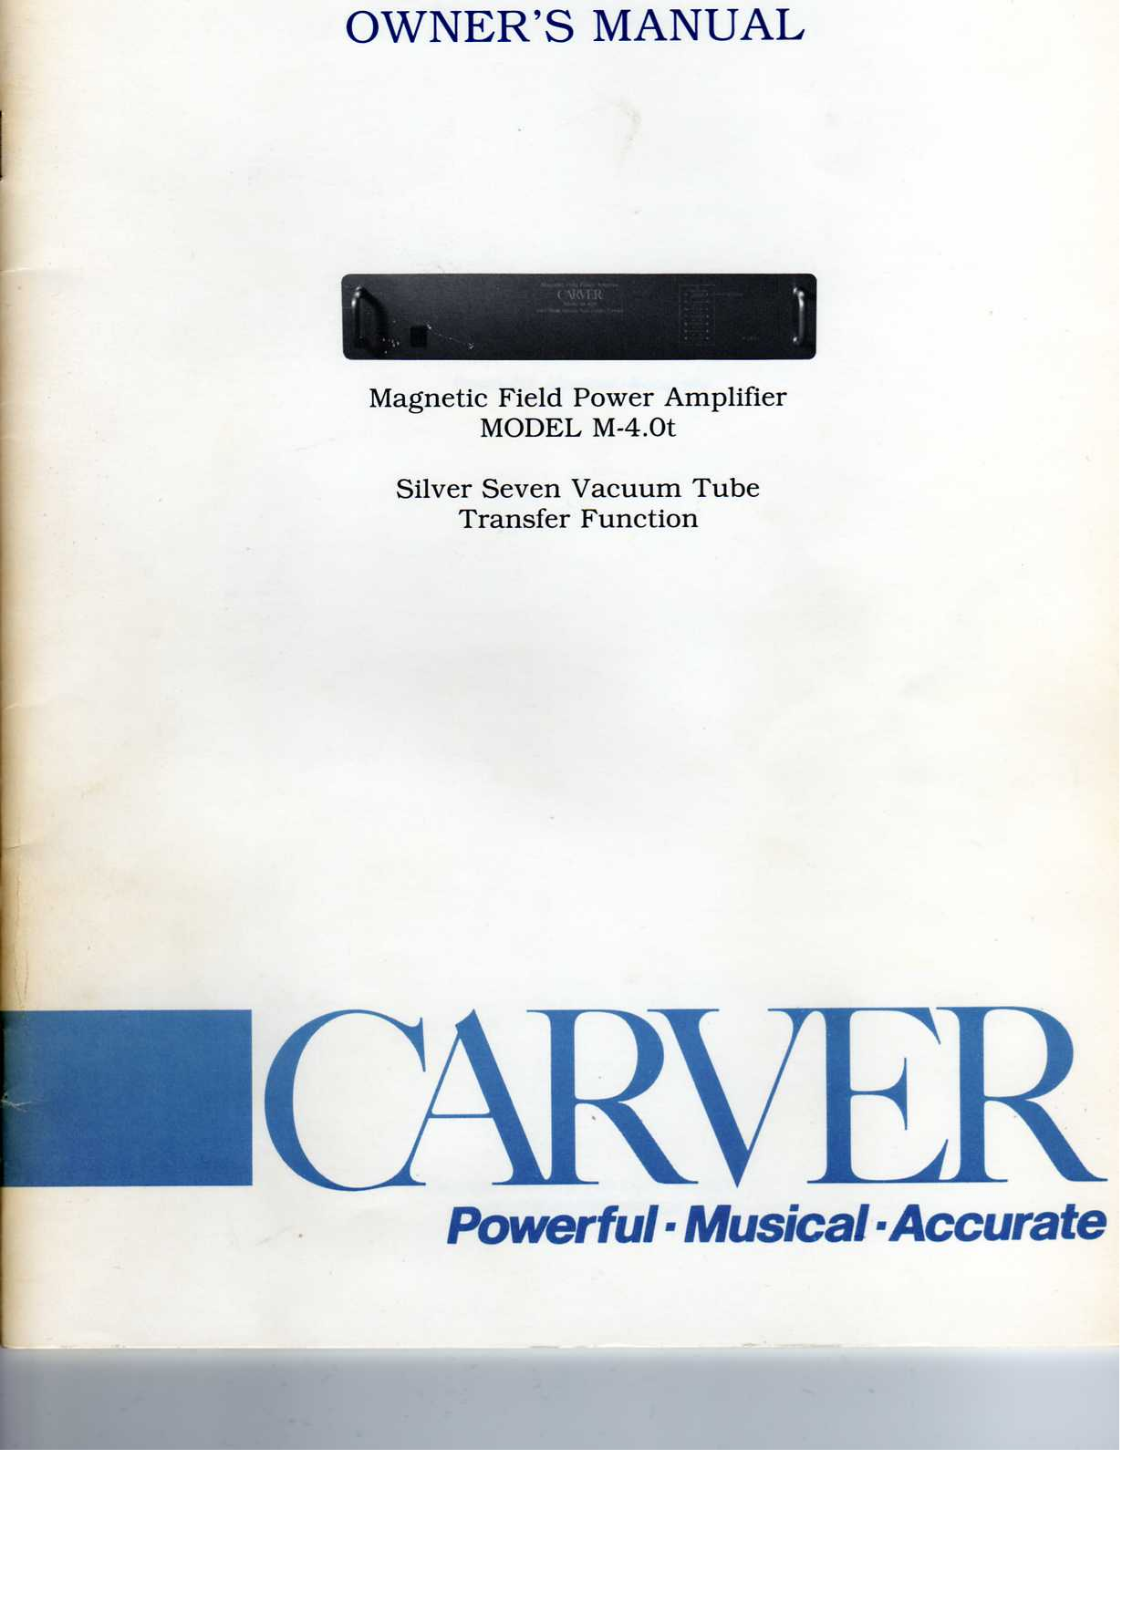 Carver M-4.0-T Owners manual